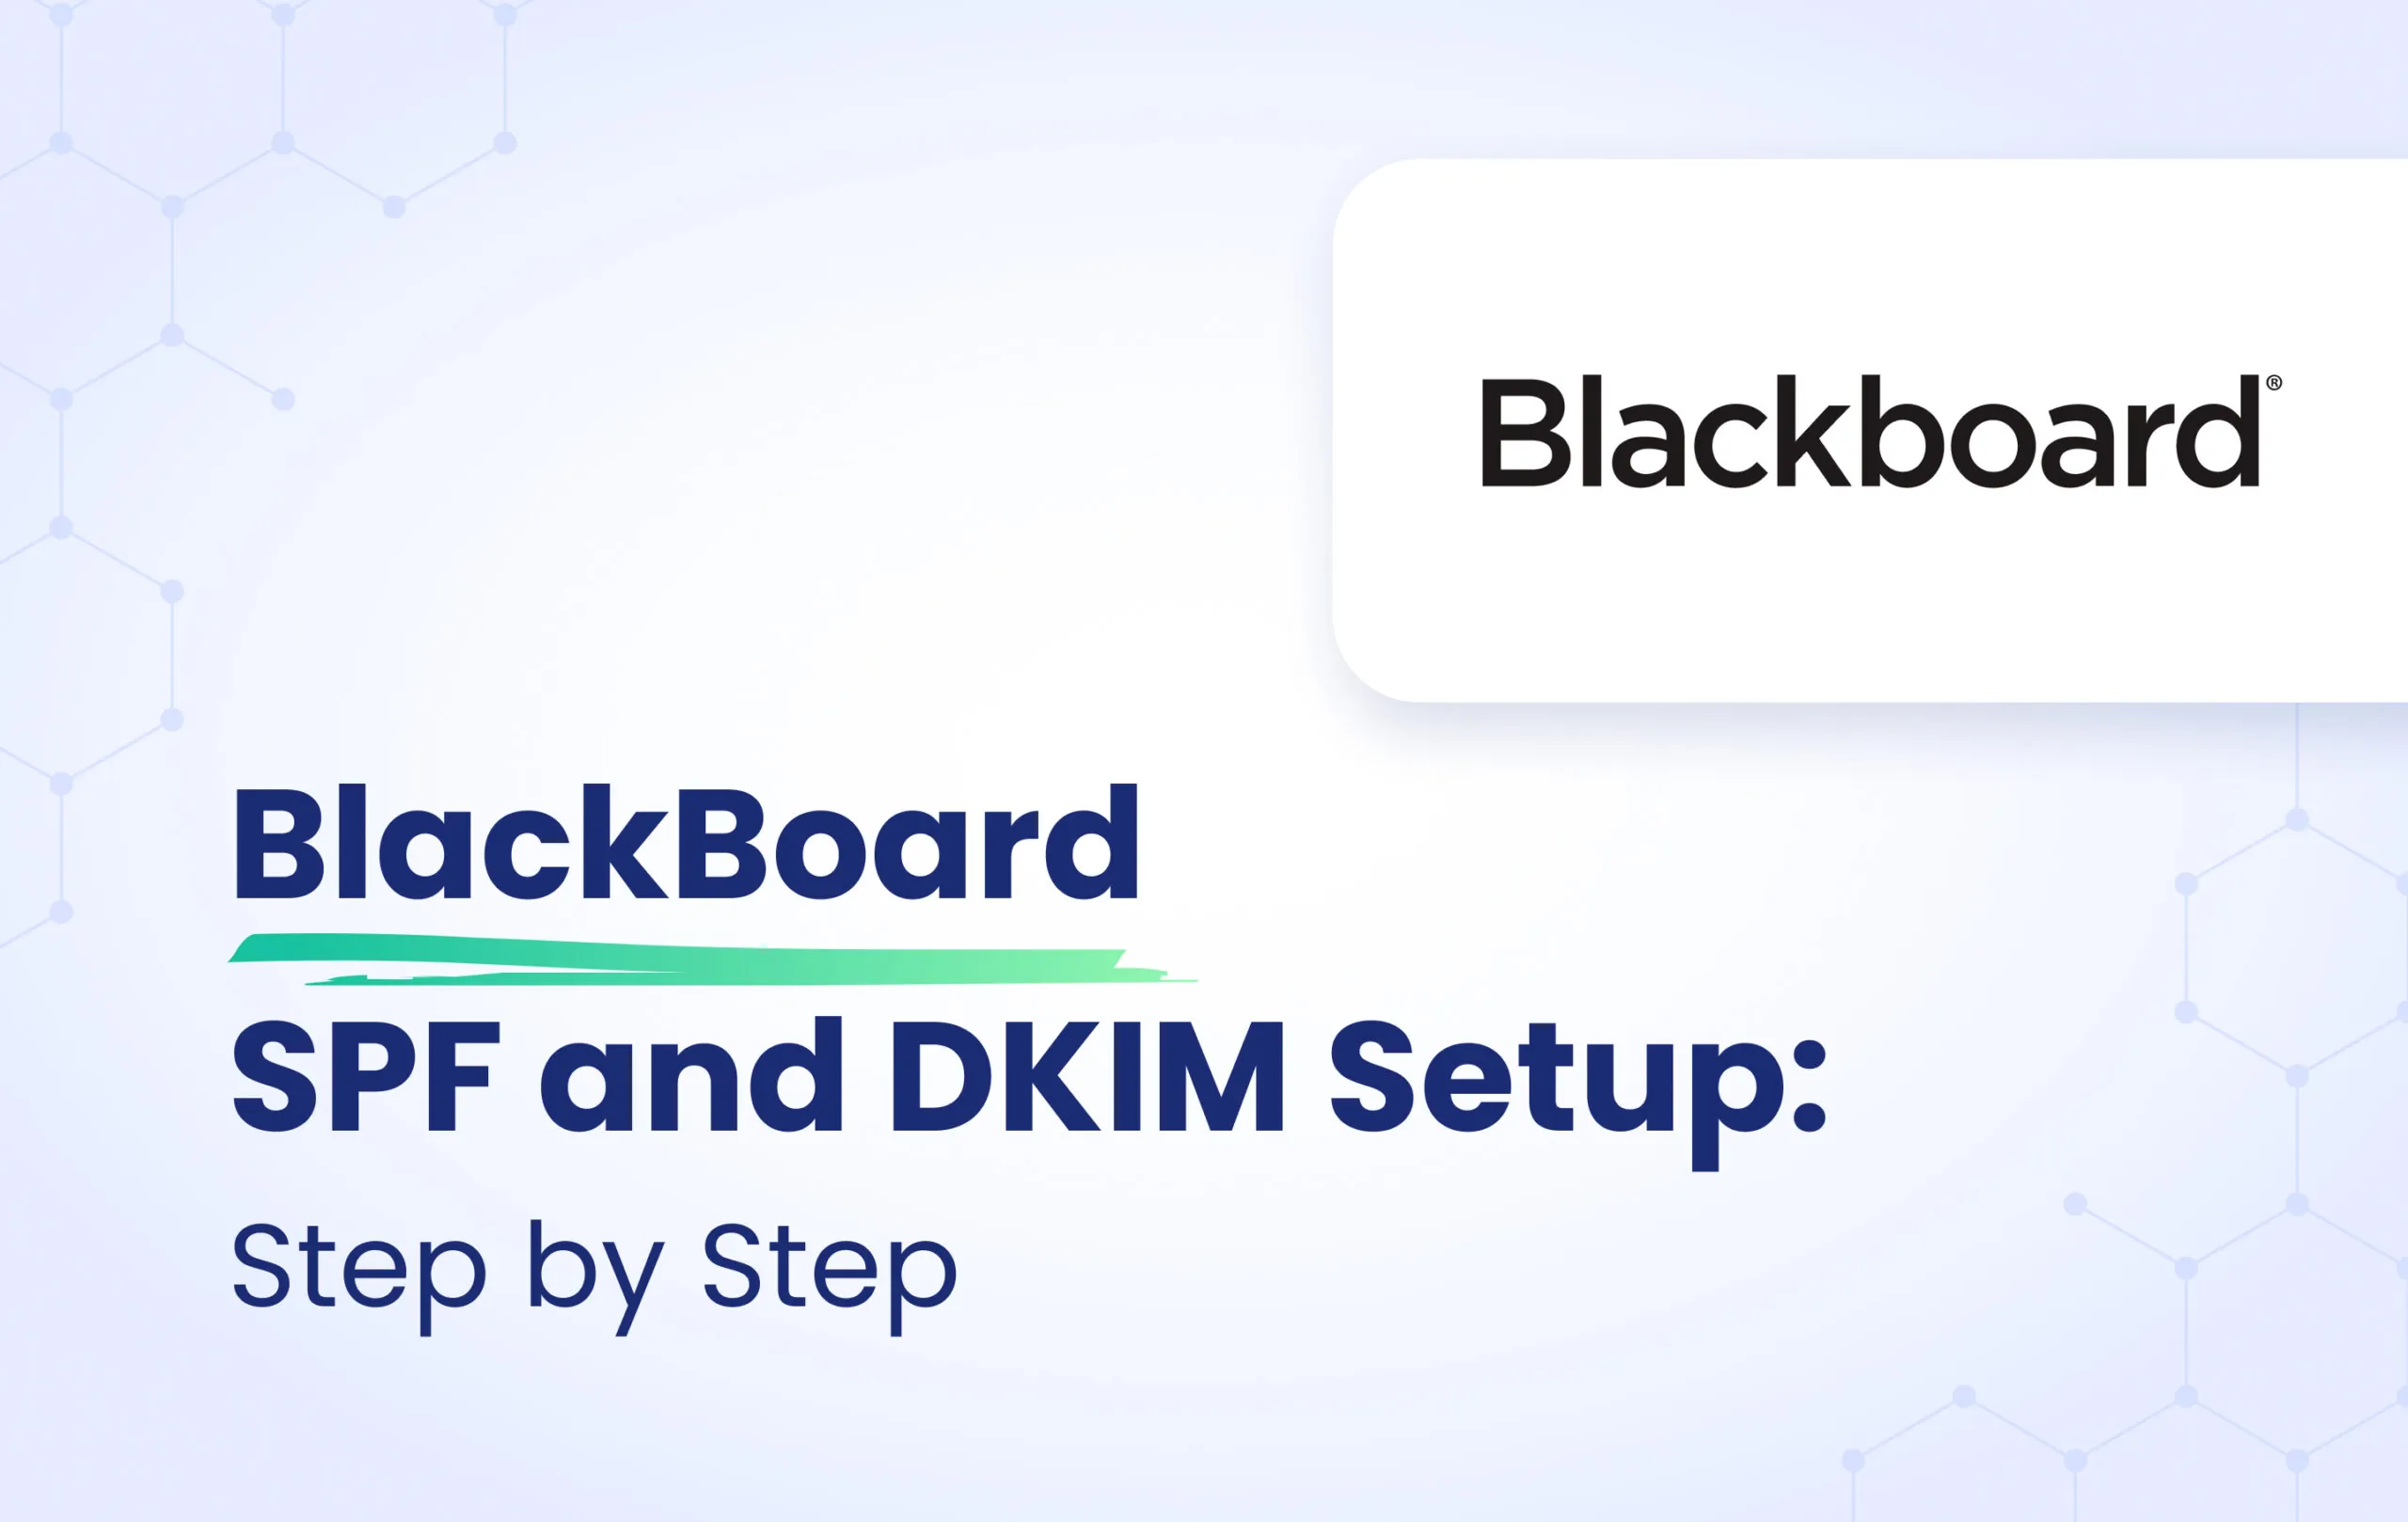 Blackboard SPF and DKIM Configuration: Step-by-Step featured image